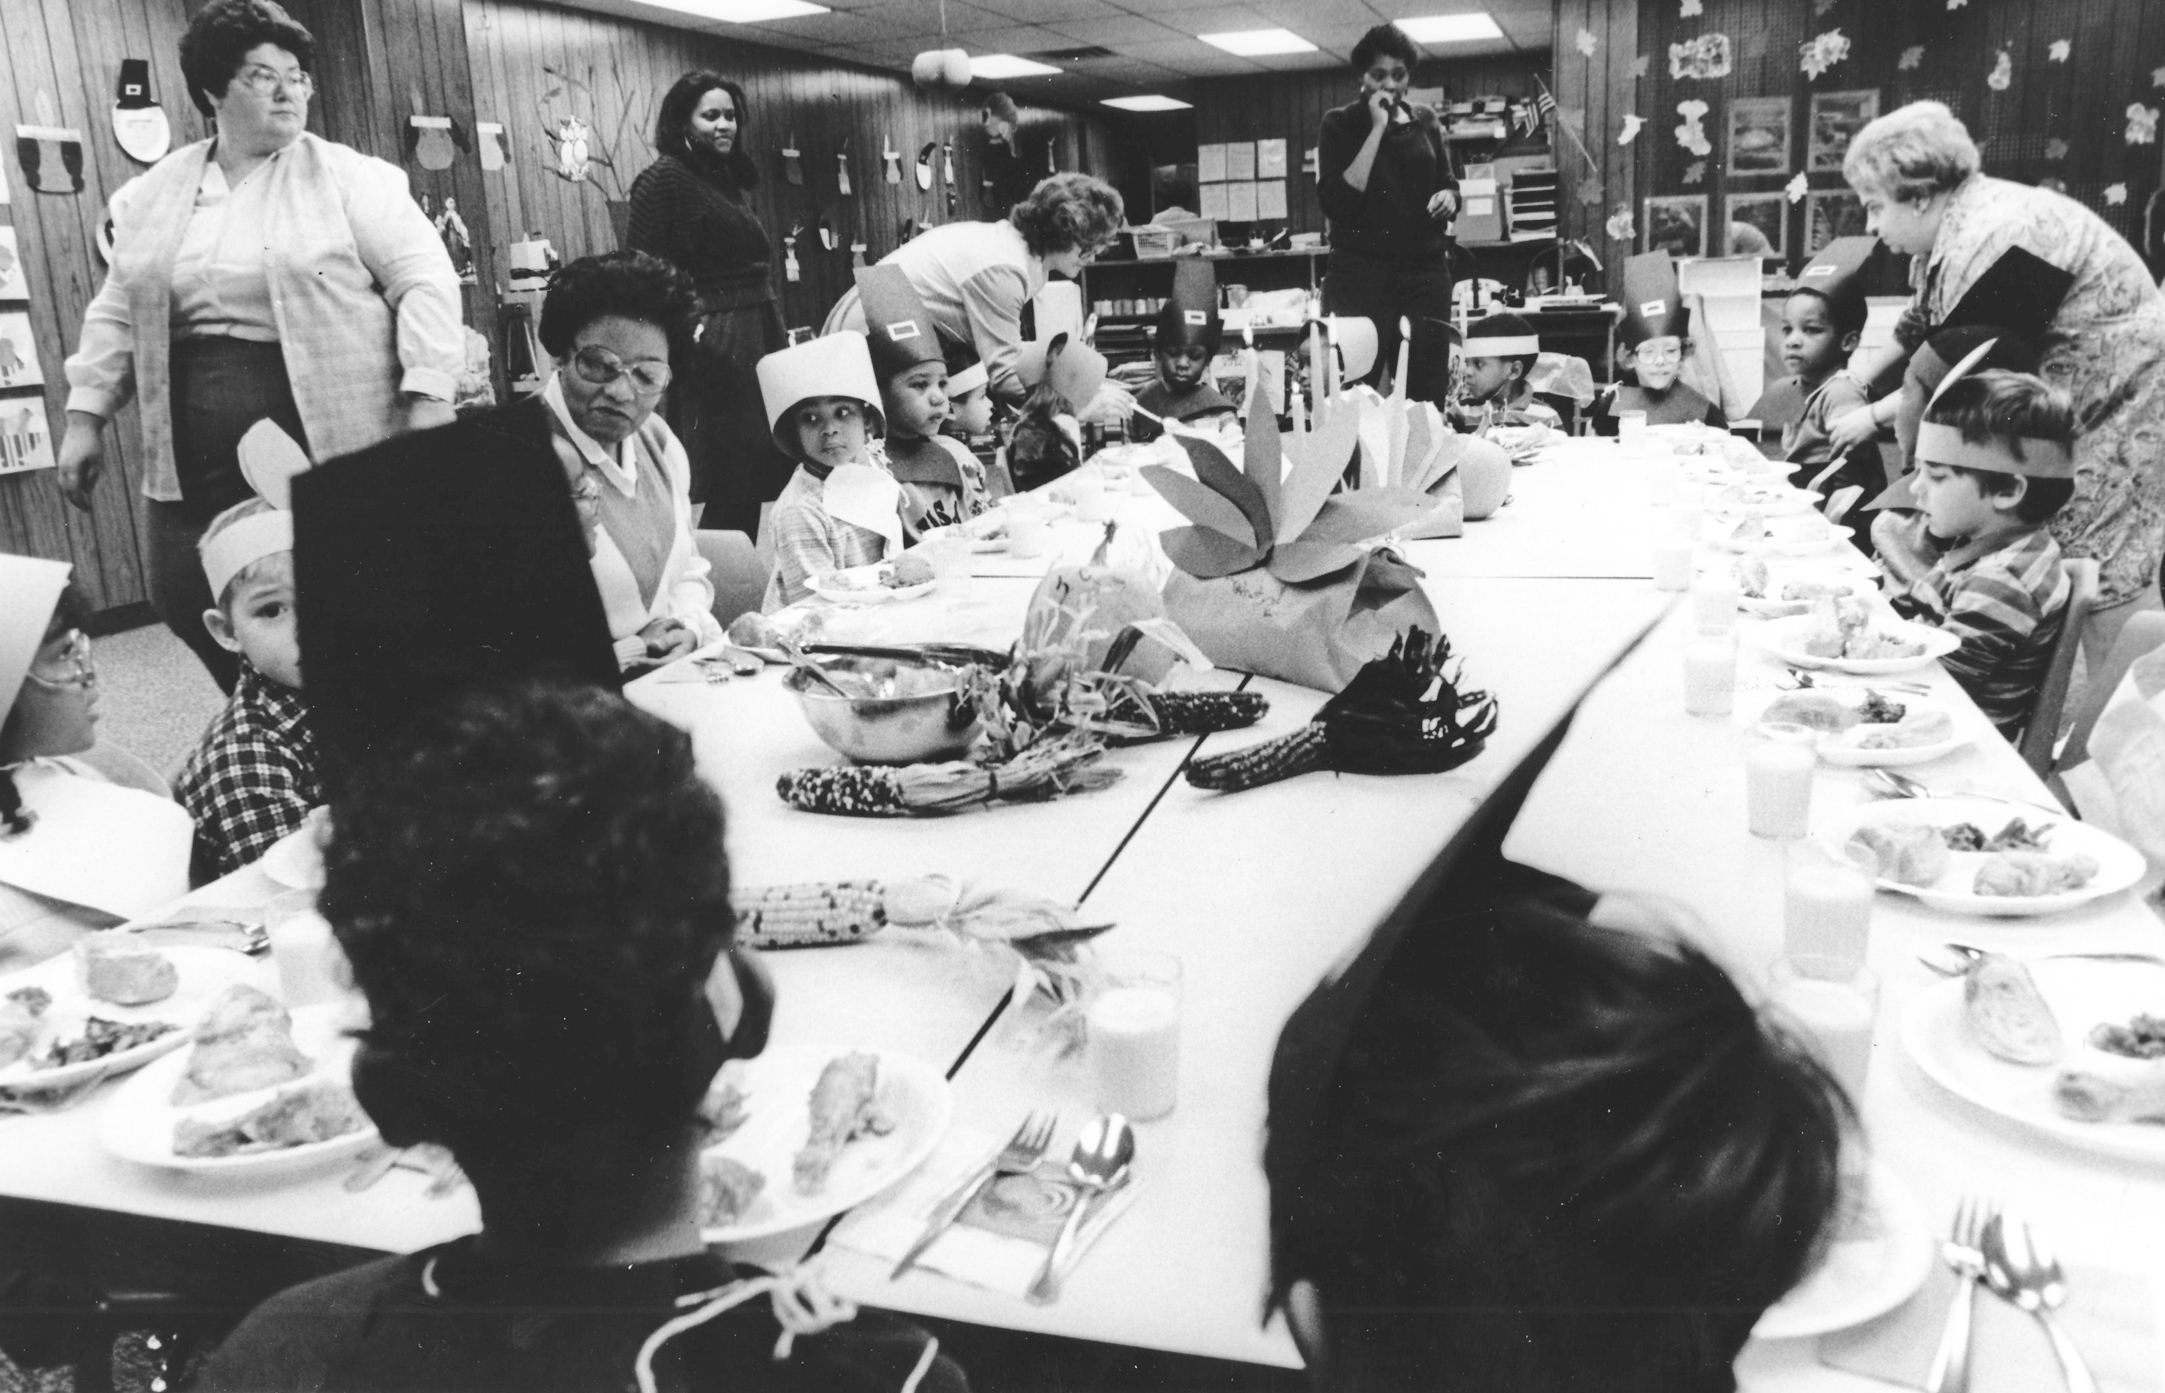 Vindicator file photo
Nov. 27, 1985: Modern-day Pilgrims and Indians sat down to a Thanksgiving feast at the Mill Creek Child Care Center at 498 Glenwood Ave. The students, aged 4 and 5, dressed as the original settlers and native inhabitants of Plymouth, Mass. The children learned about traditional holiday customs from their teachers, who sat down and broke break with their charges. Go to Vindy.com to purchase a copy of this and similar Years Ago photographs.